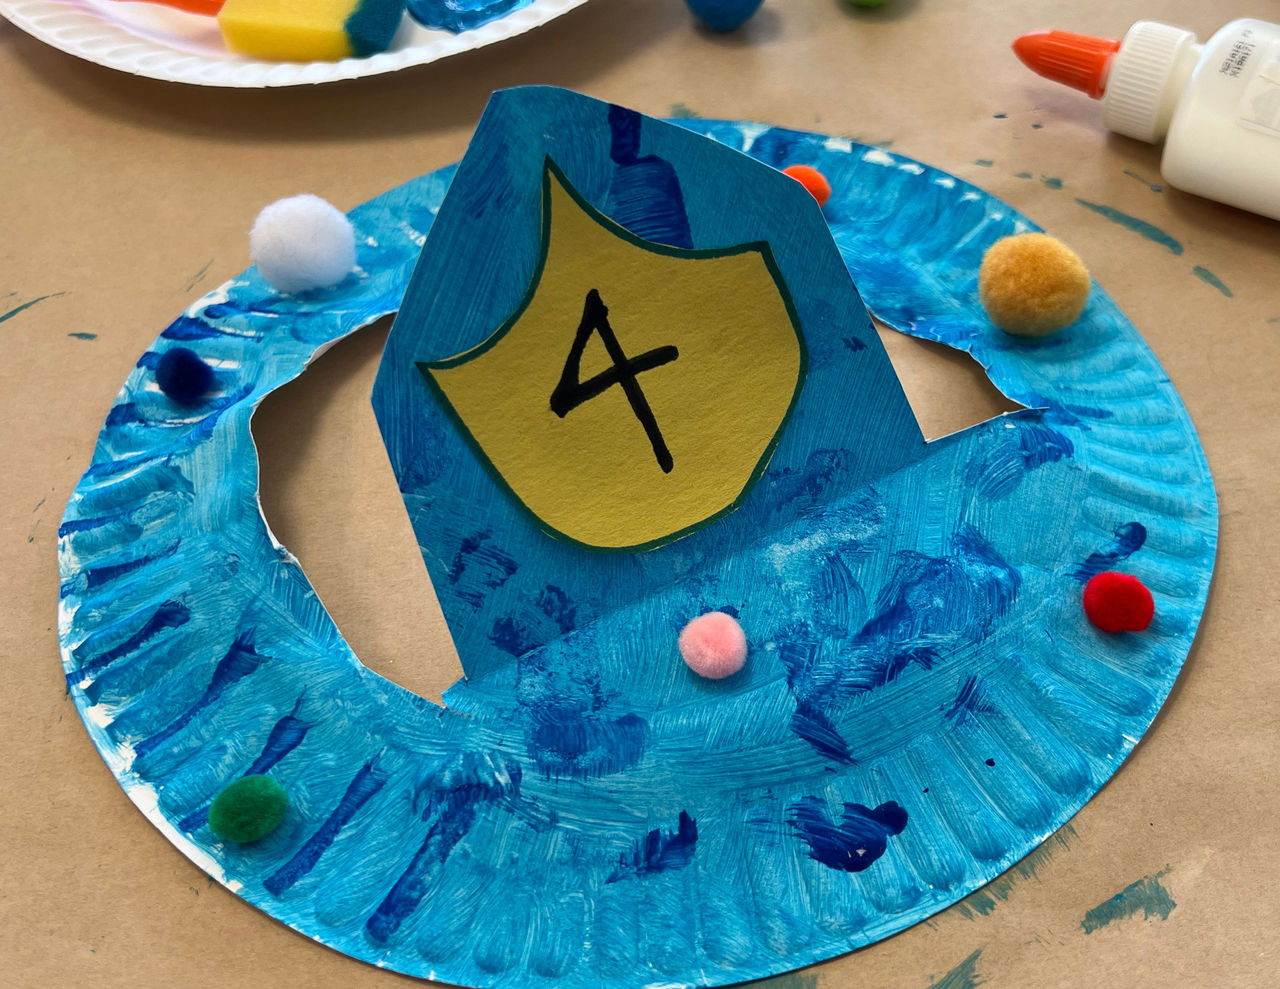 Paper plate fire helmet painted blue with pom poms and the number 4 on the shield